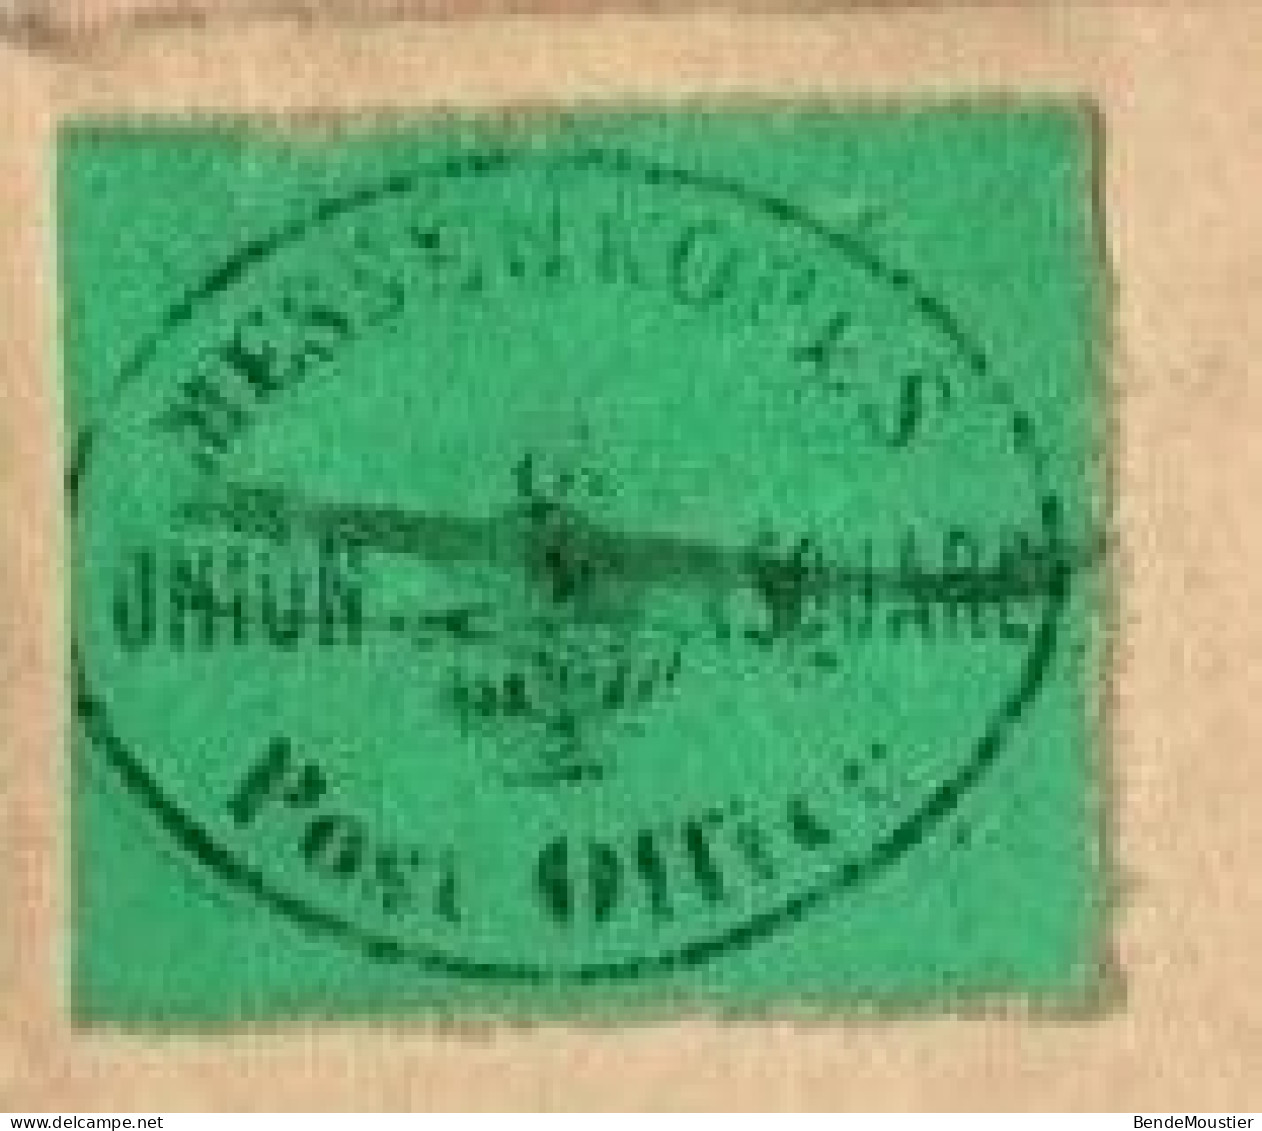 (R122) SCOTT # 106 L1  (L217) - Black On Green - Red Handstamp - Messenkope's Union Square Post Office - 1849. - Postes Locales